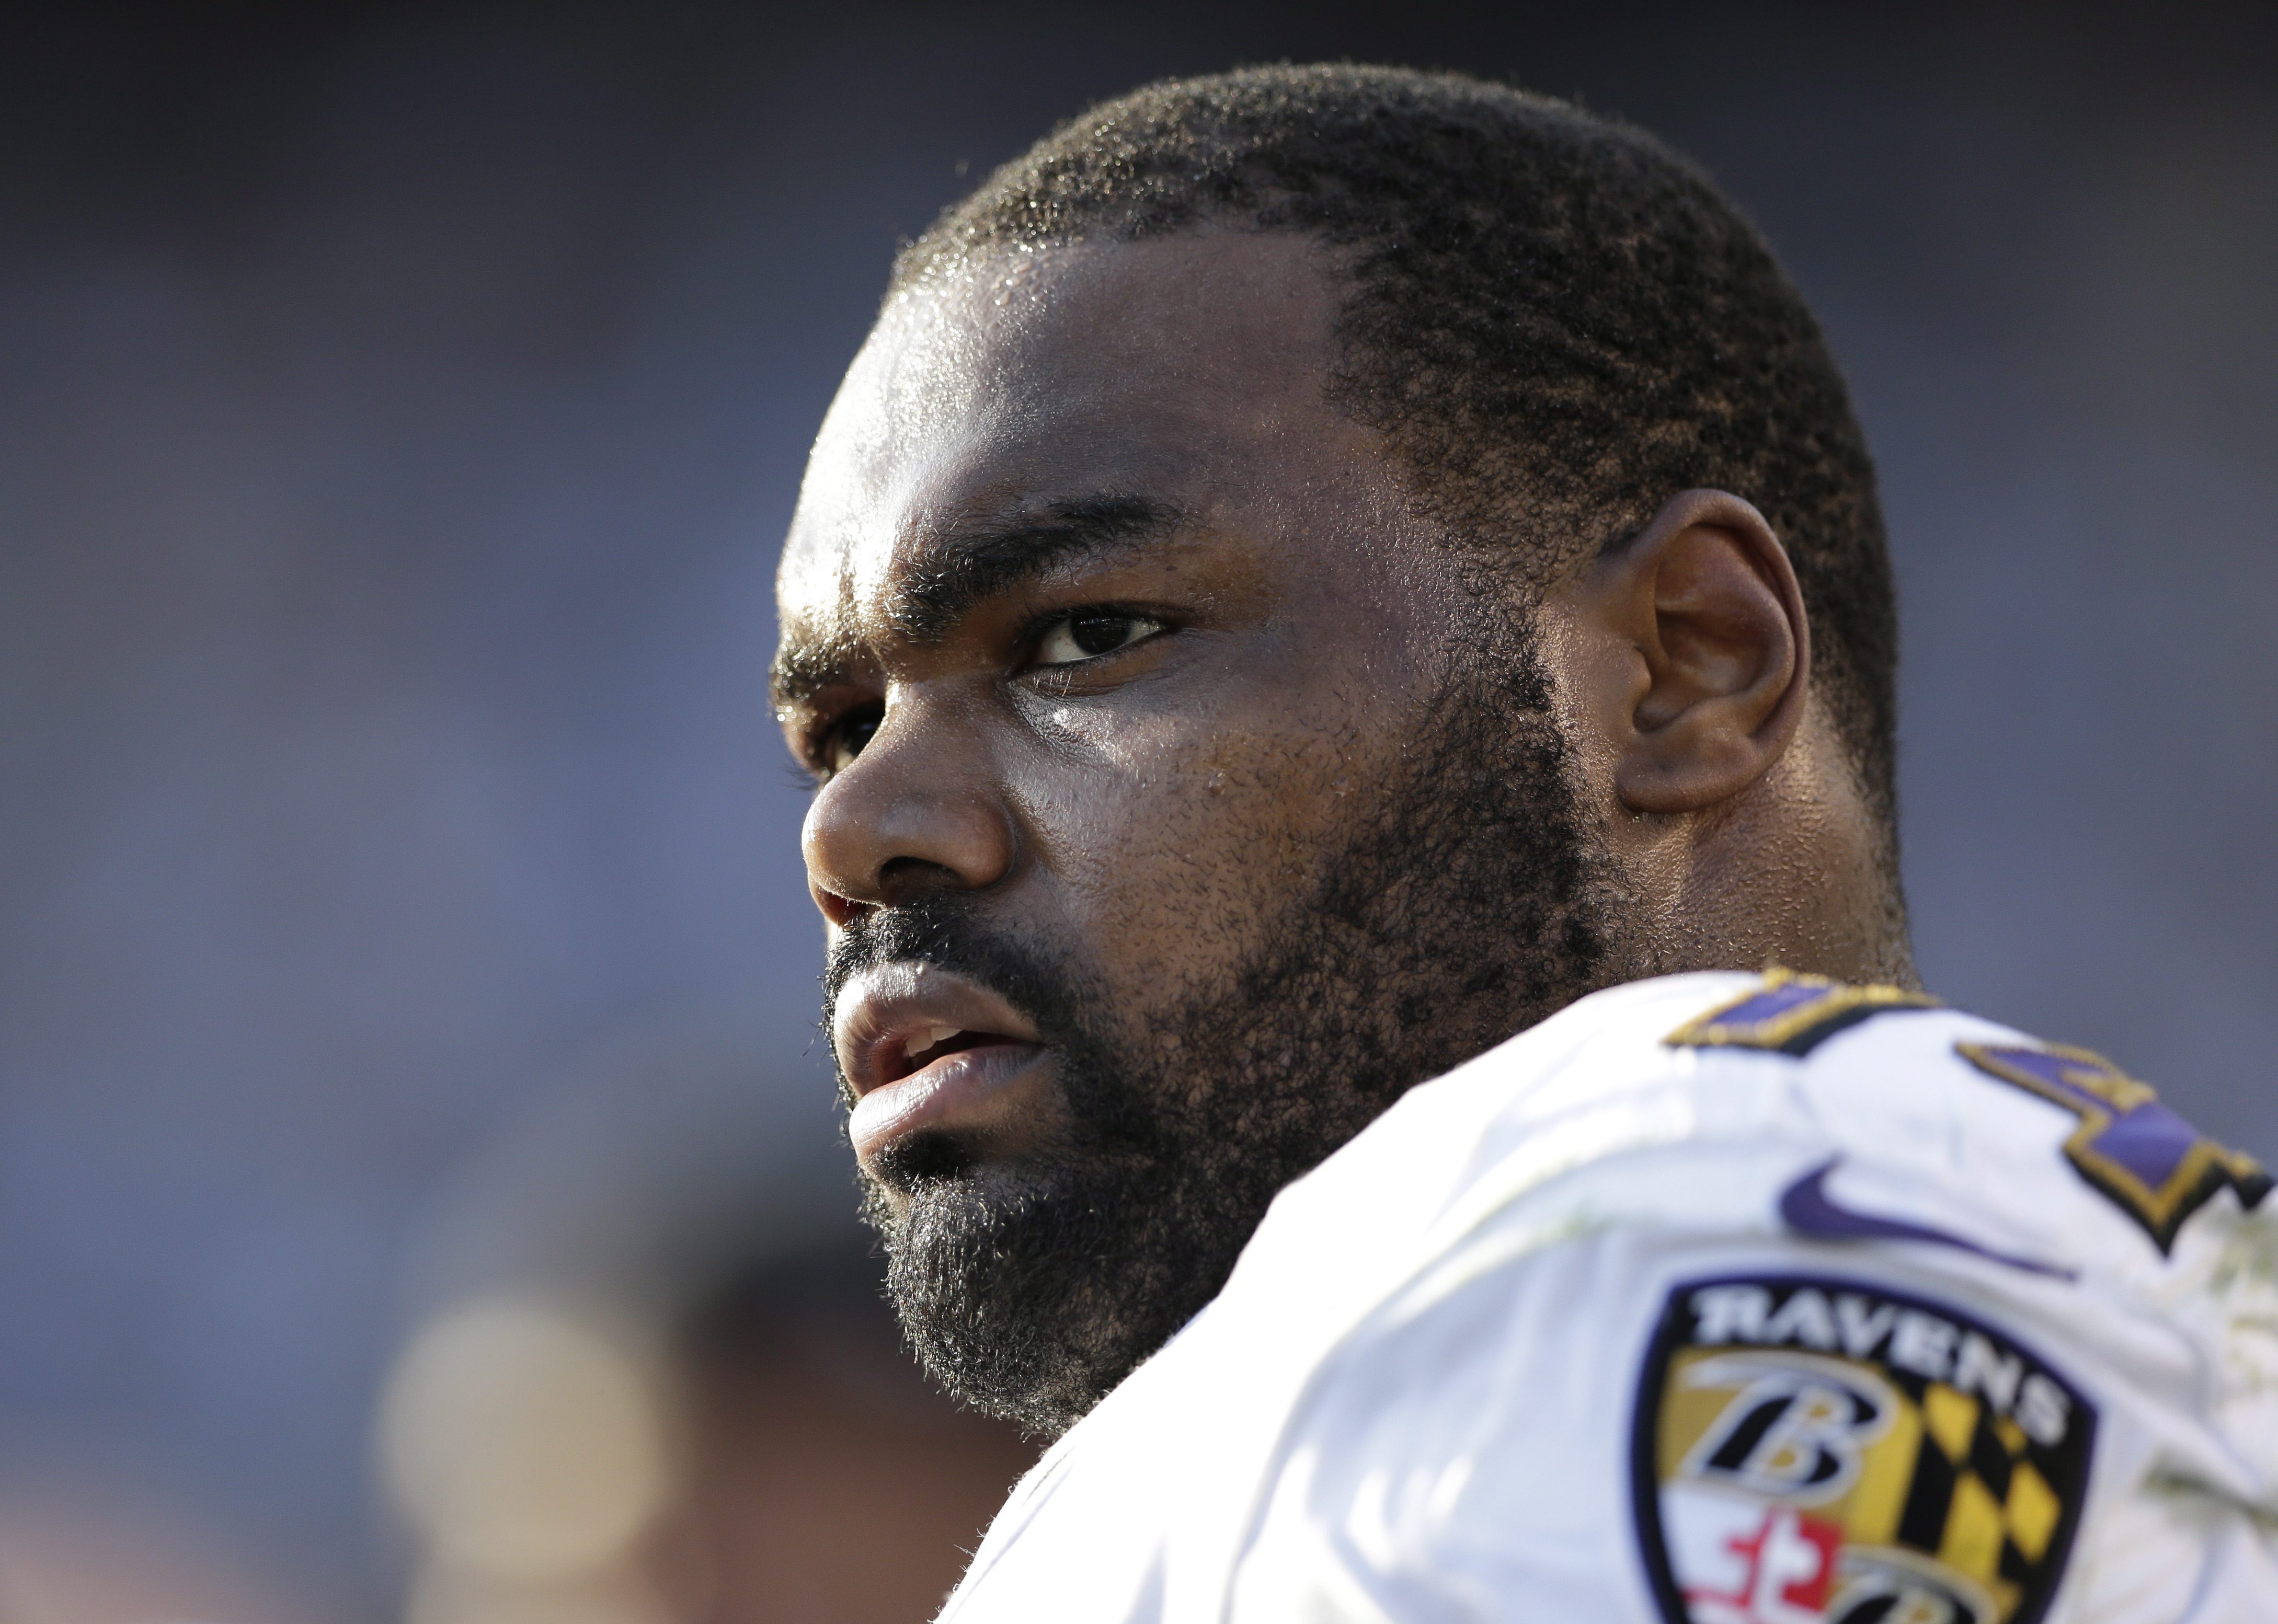 Michael Oher, 'The Blind Side' subject, sues Tuohy family over